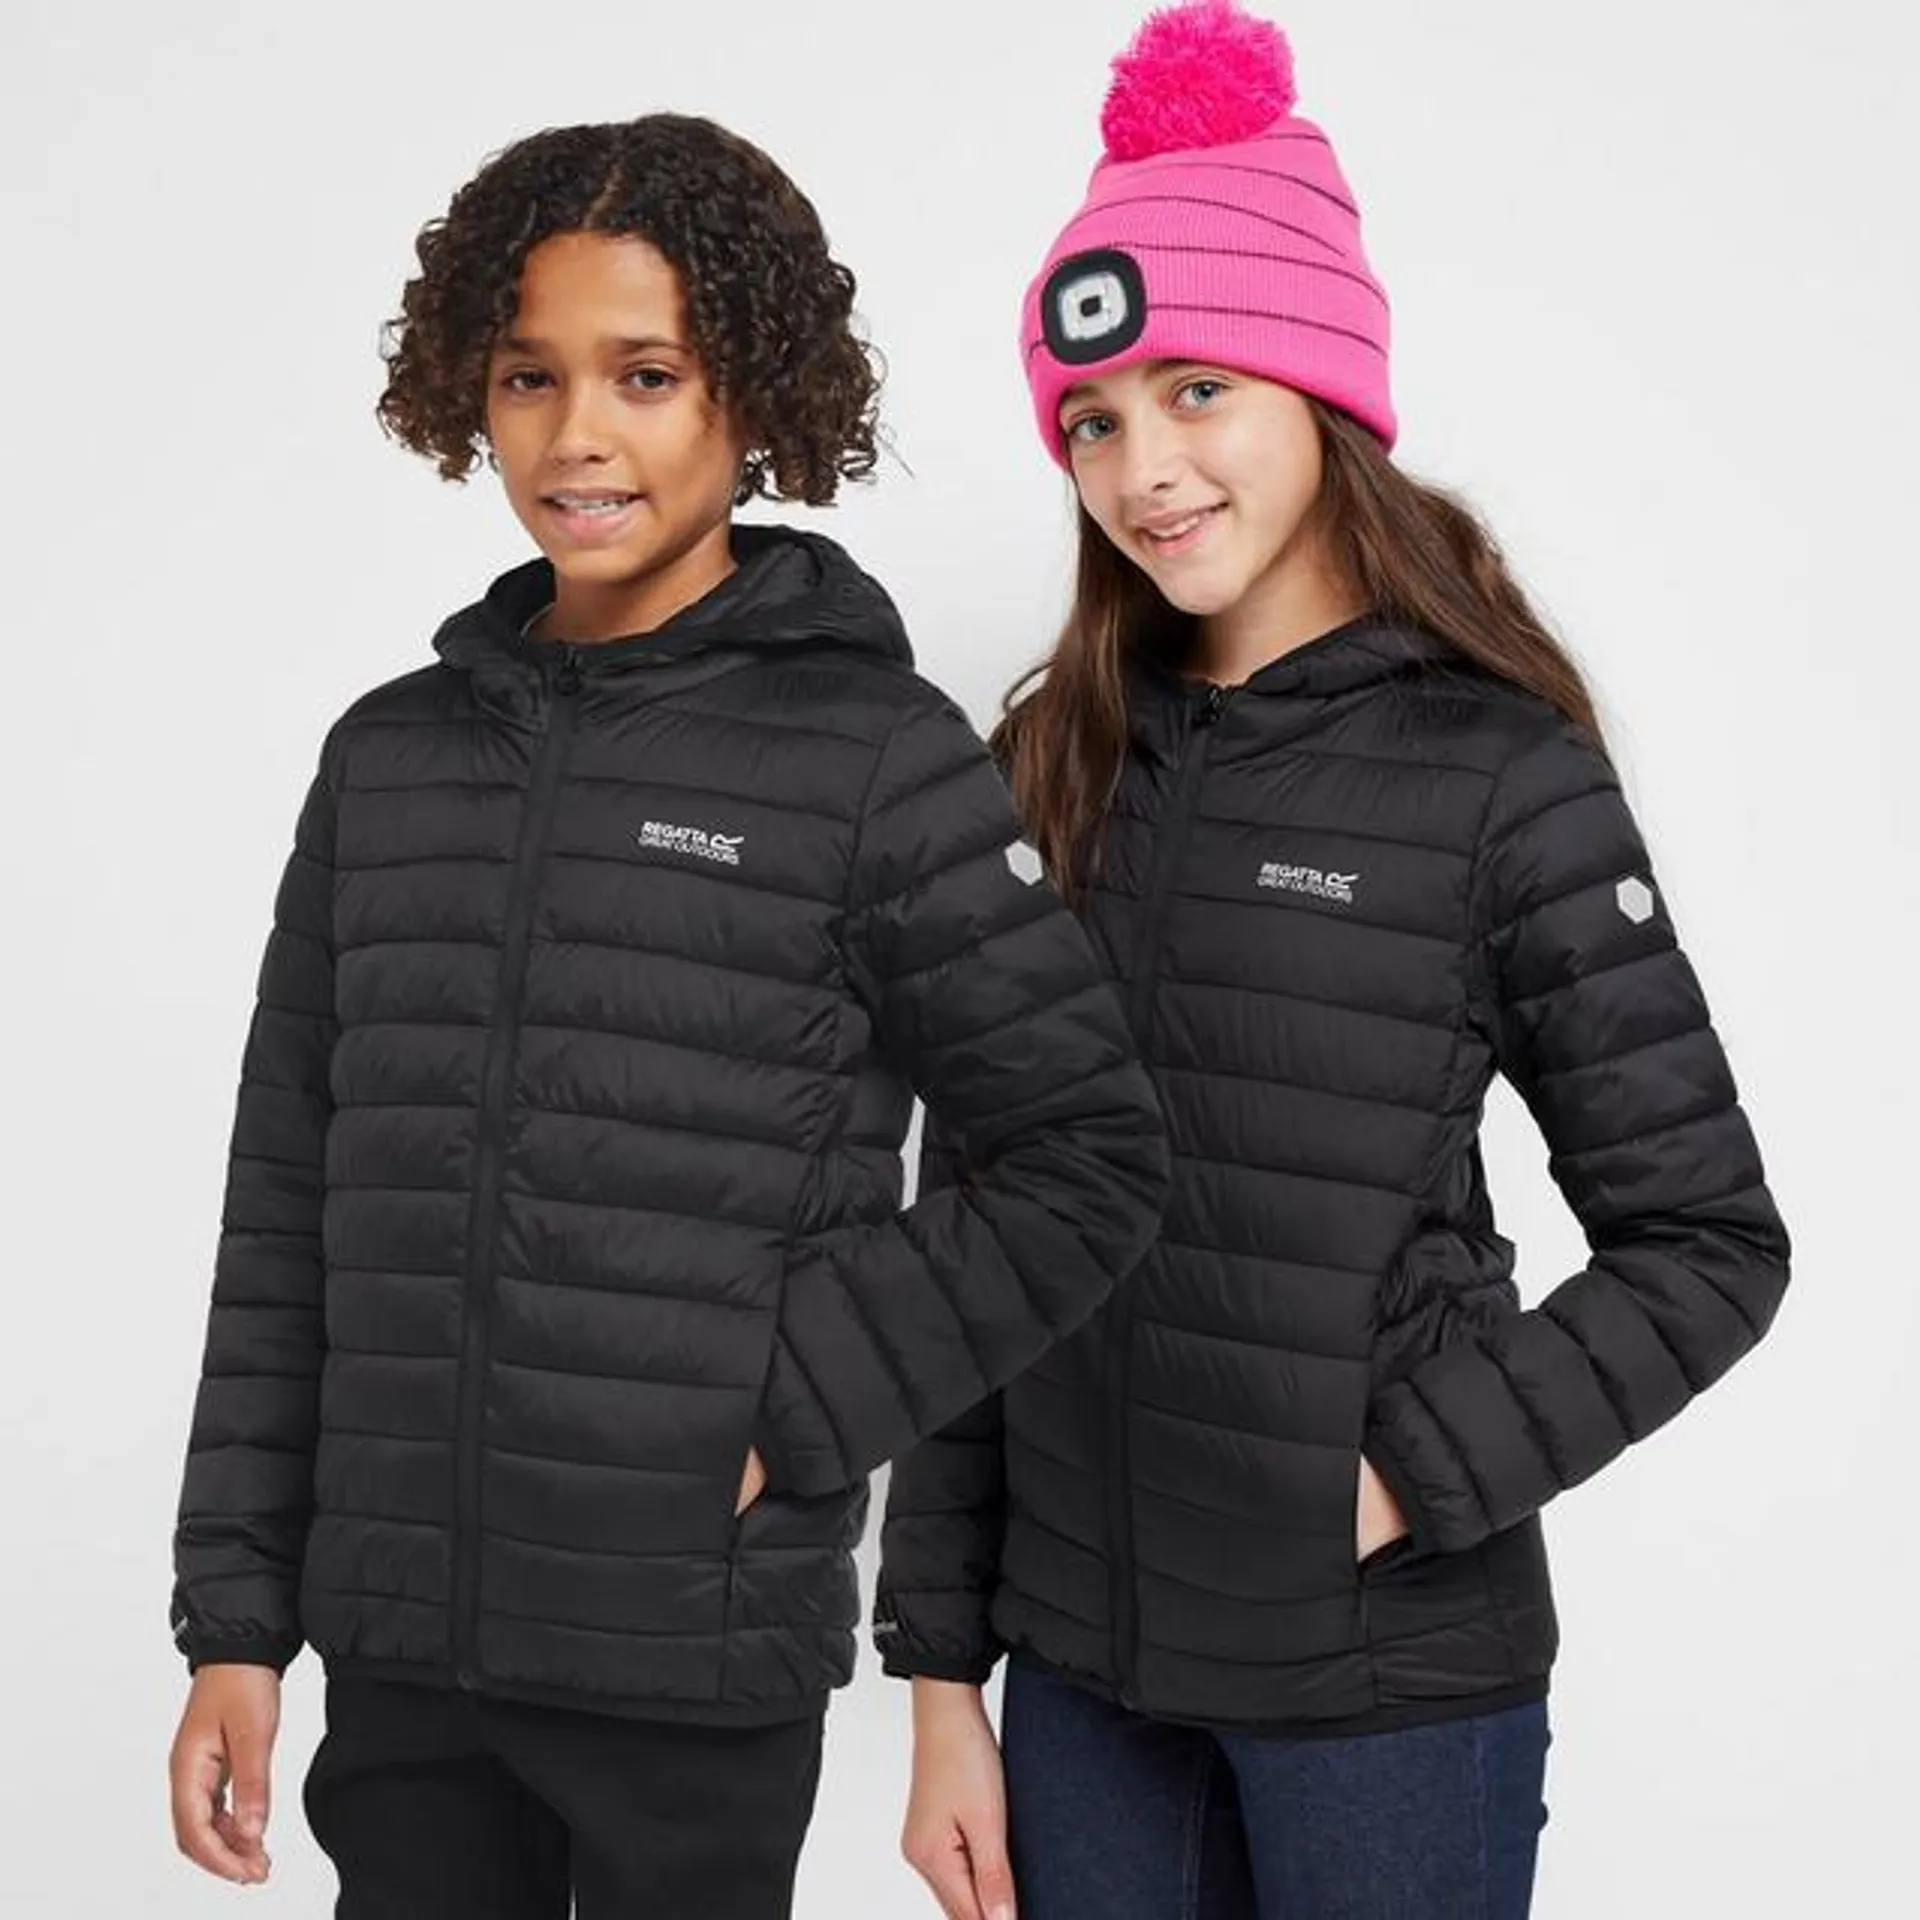 Kids' Hillpack Insulated Jacket